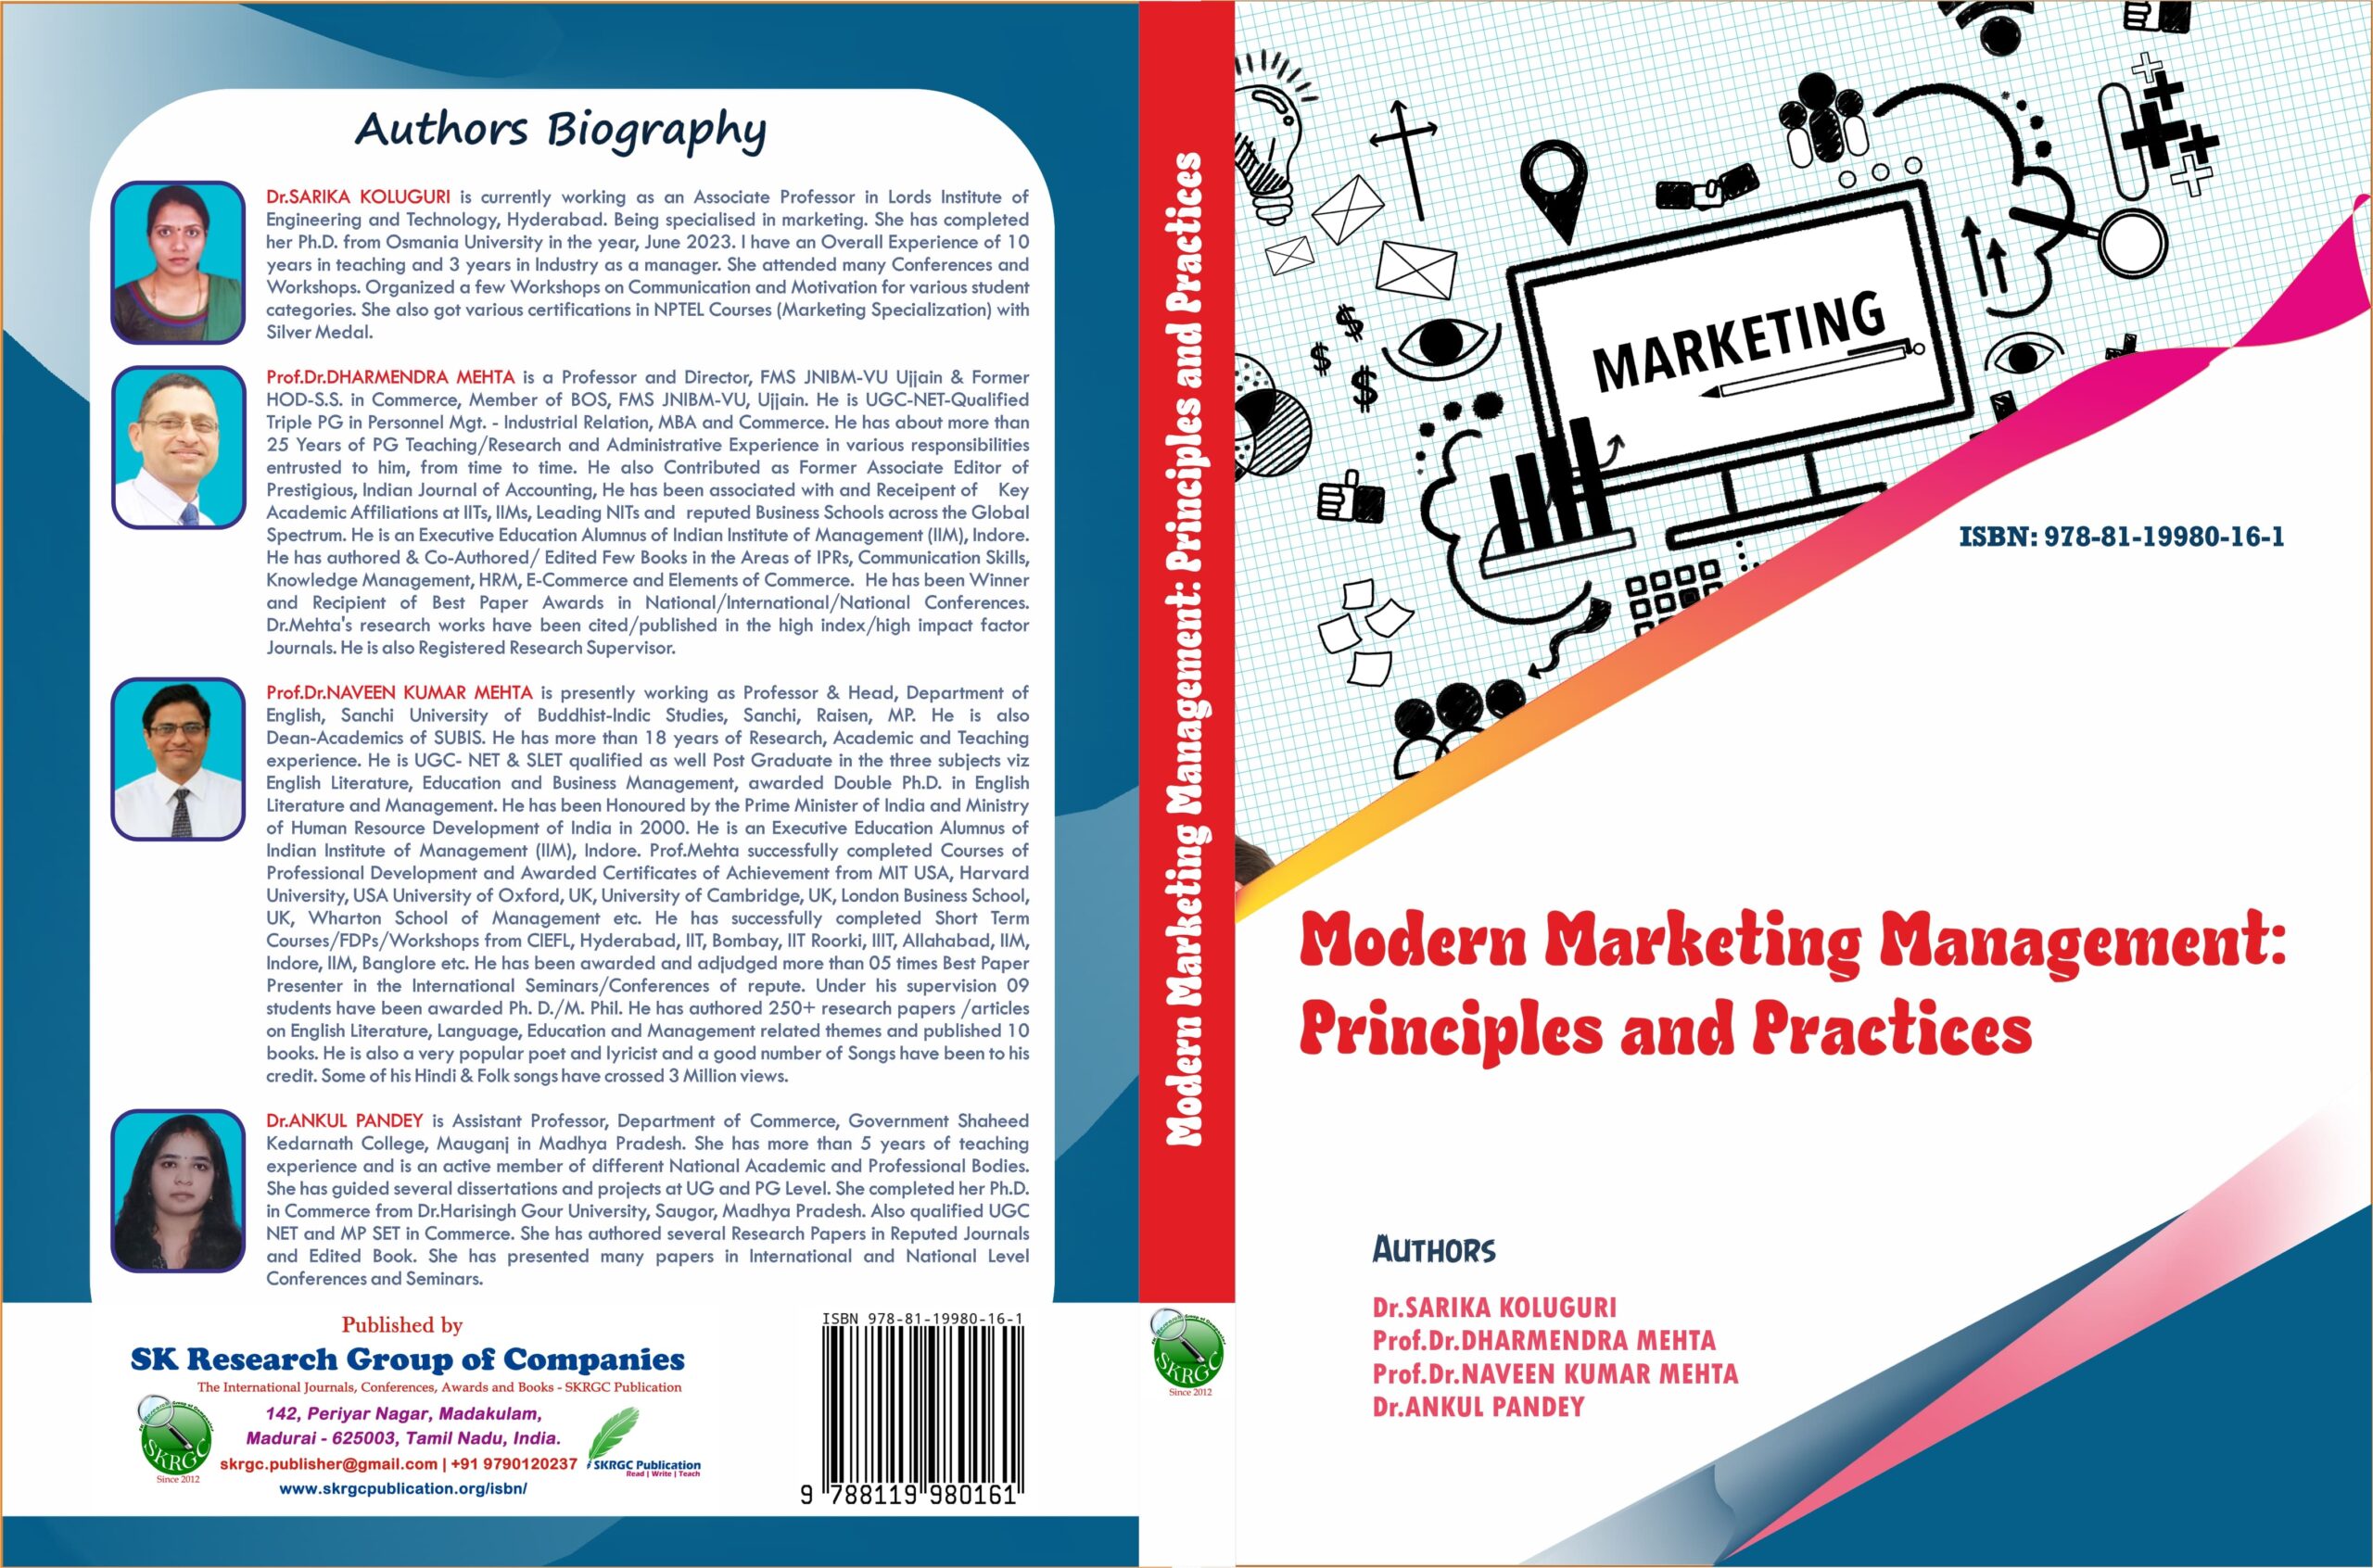 MODERN MARKETING MANAGEMENT: PRINCIPLES AND PRACTICES